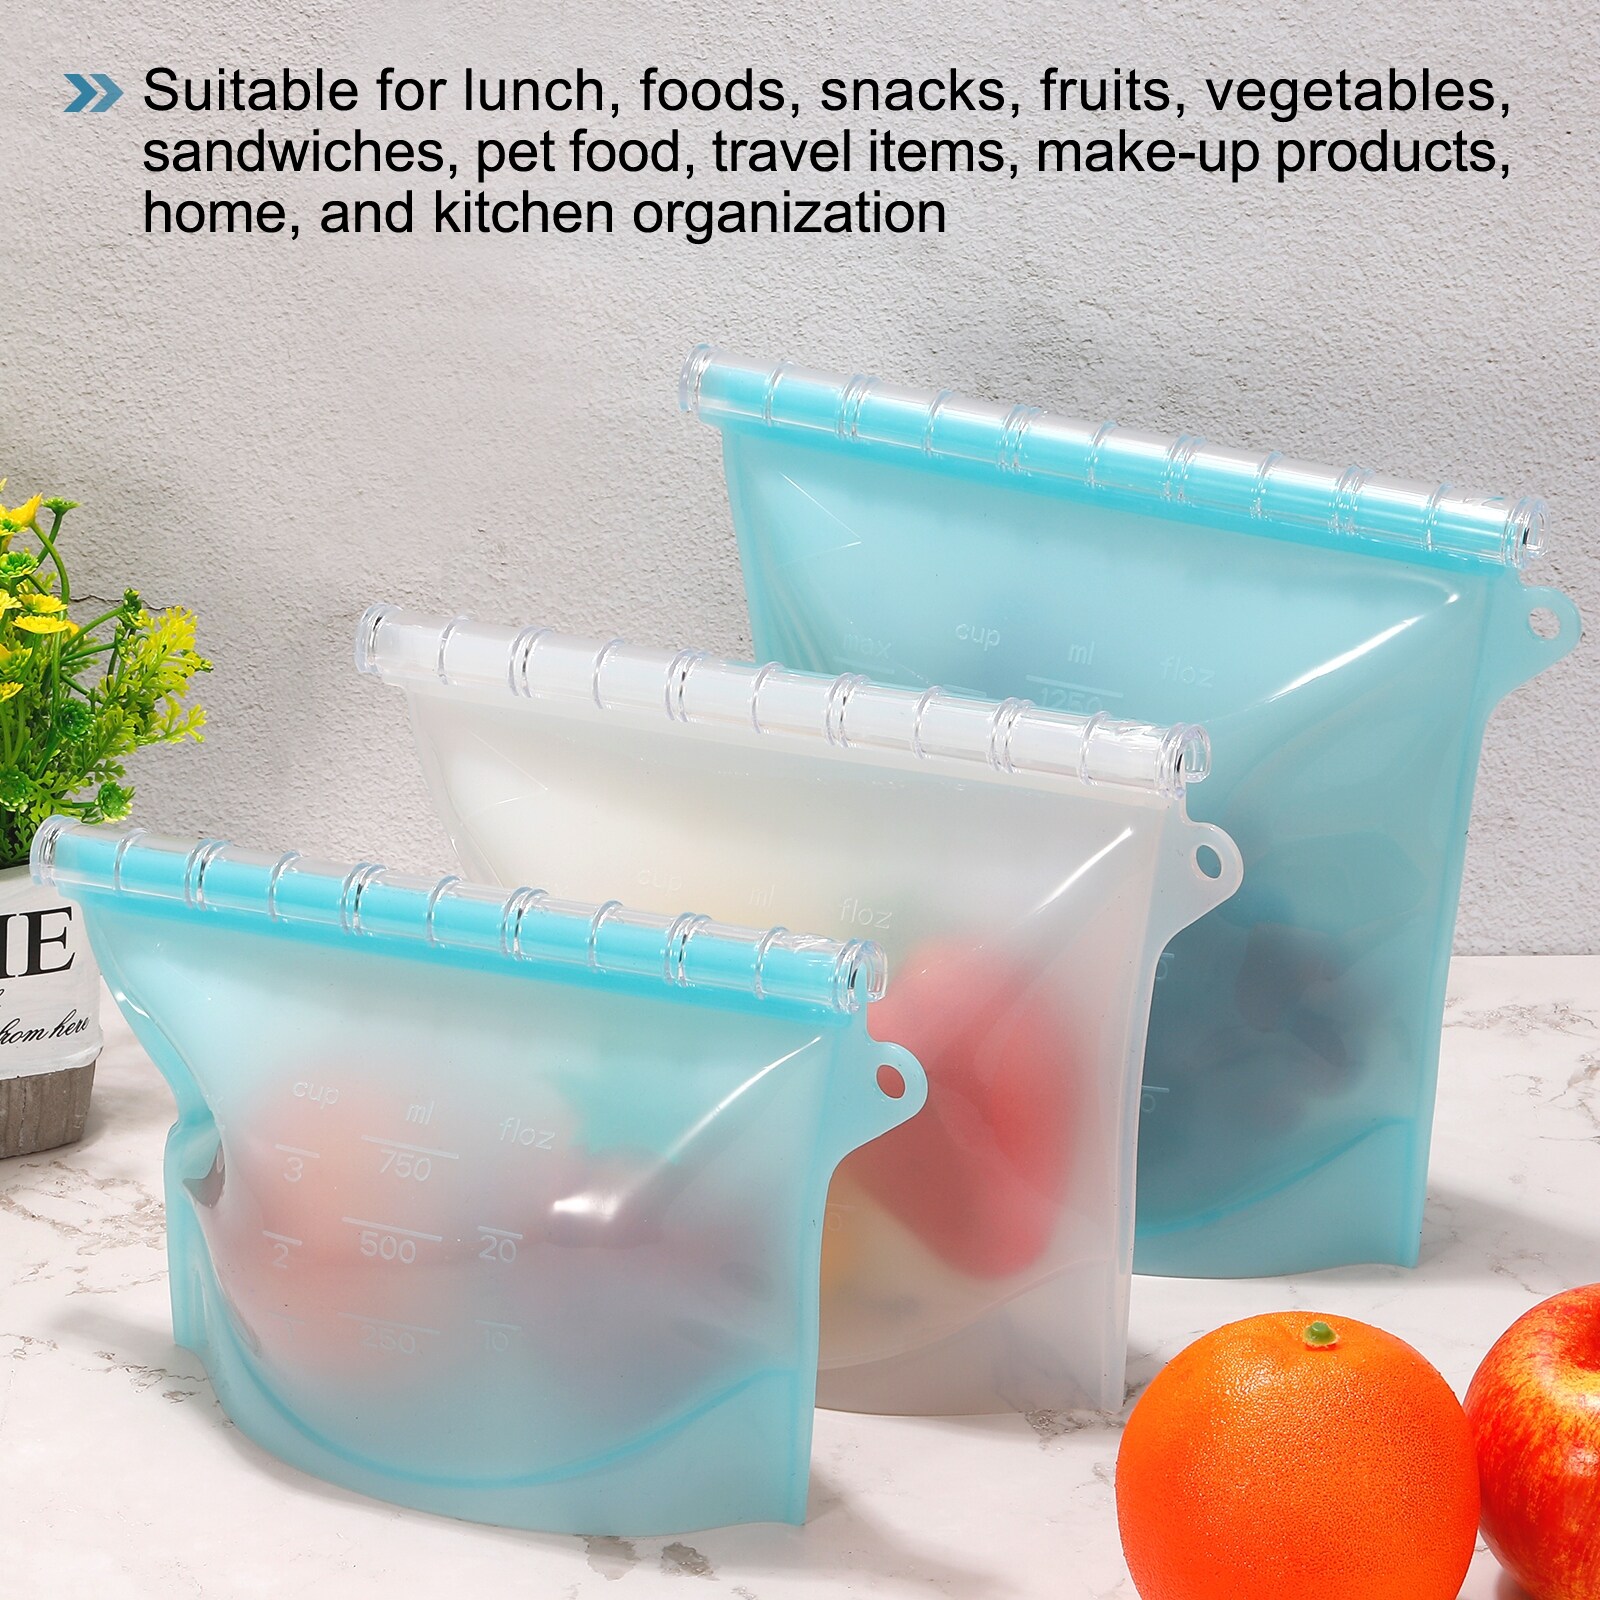 https://ak1.ostkcdn.com/images/products/is/images/direct/b166ee4488fbcc32209b9422385124fc41e9b743/Reusable-Silicone-Food-Storage-Bags-Leakproof-Freezer-Bag-White%2BBlue%285Pcs%29.jpg